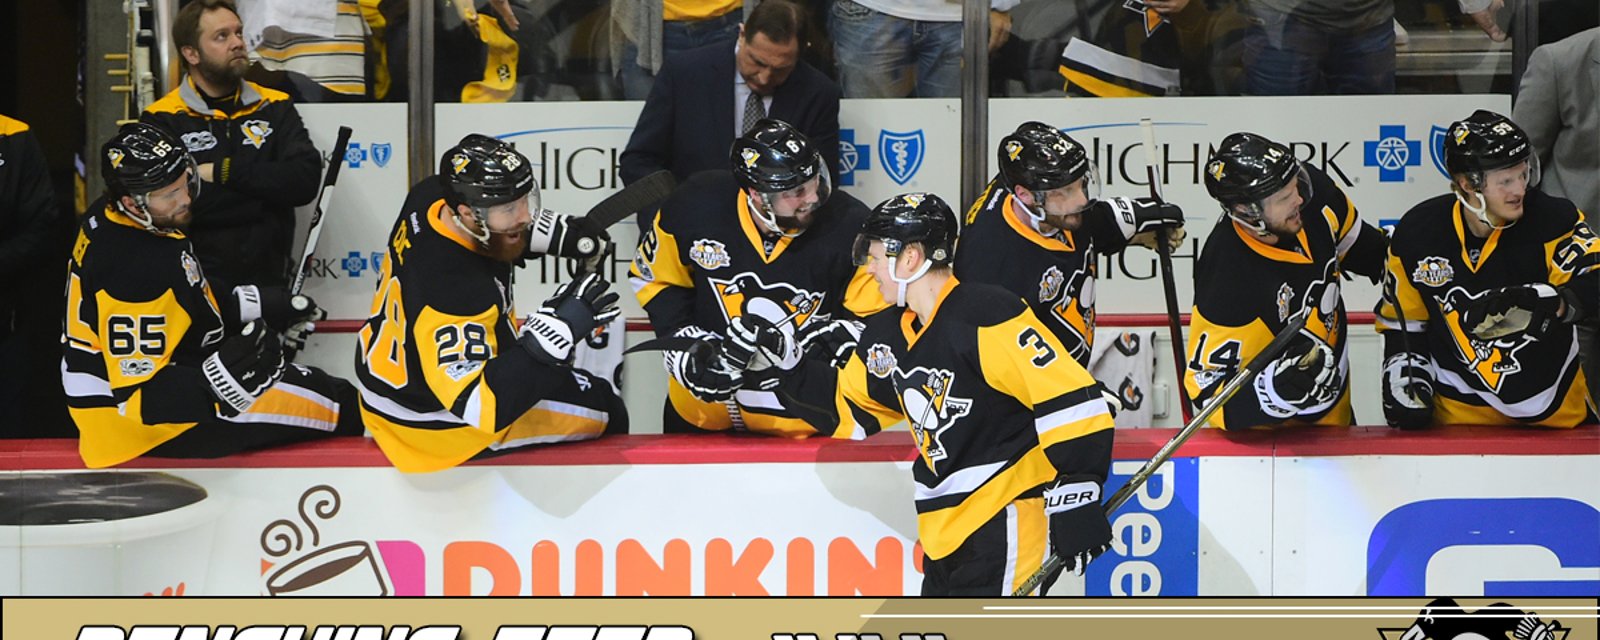 Penguins forward now ranks 2nd all-time in Game 7 wins